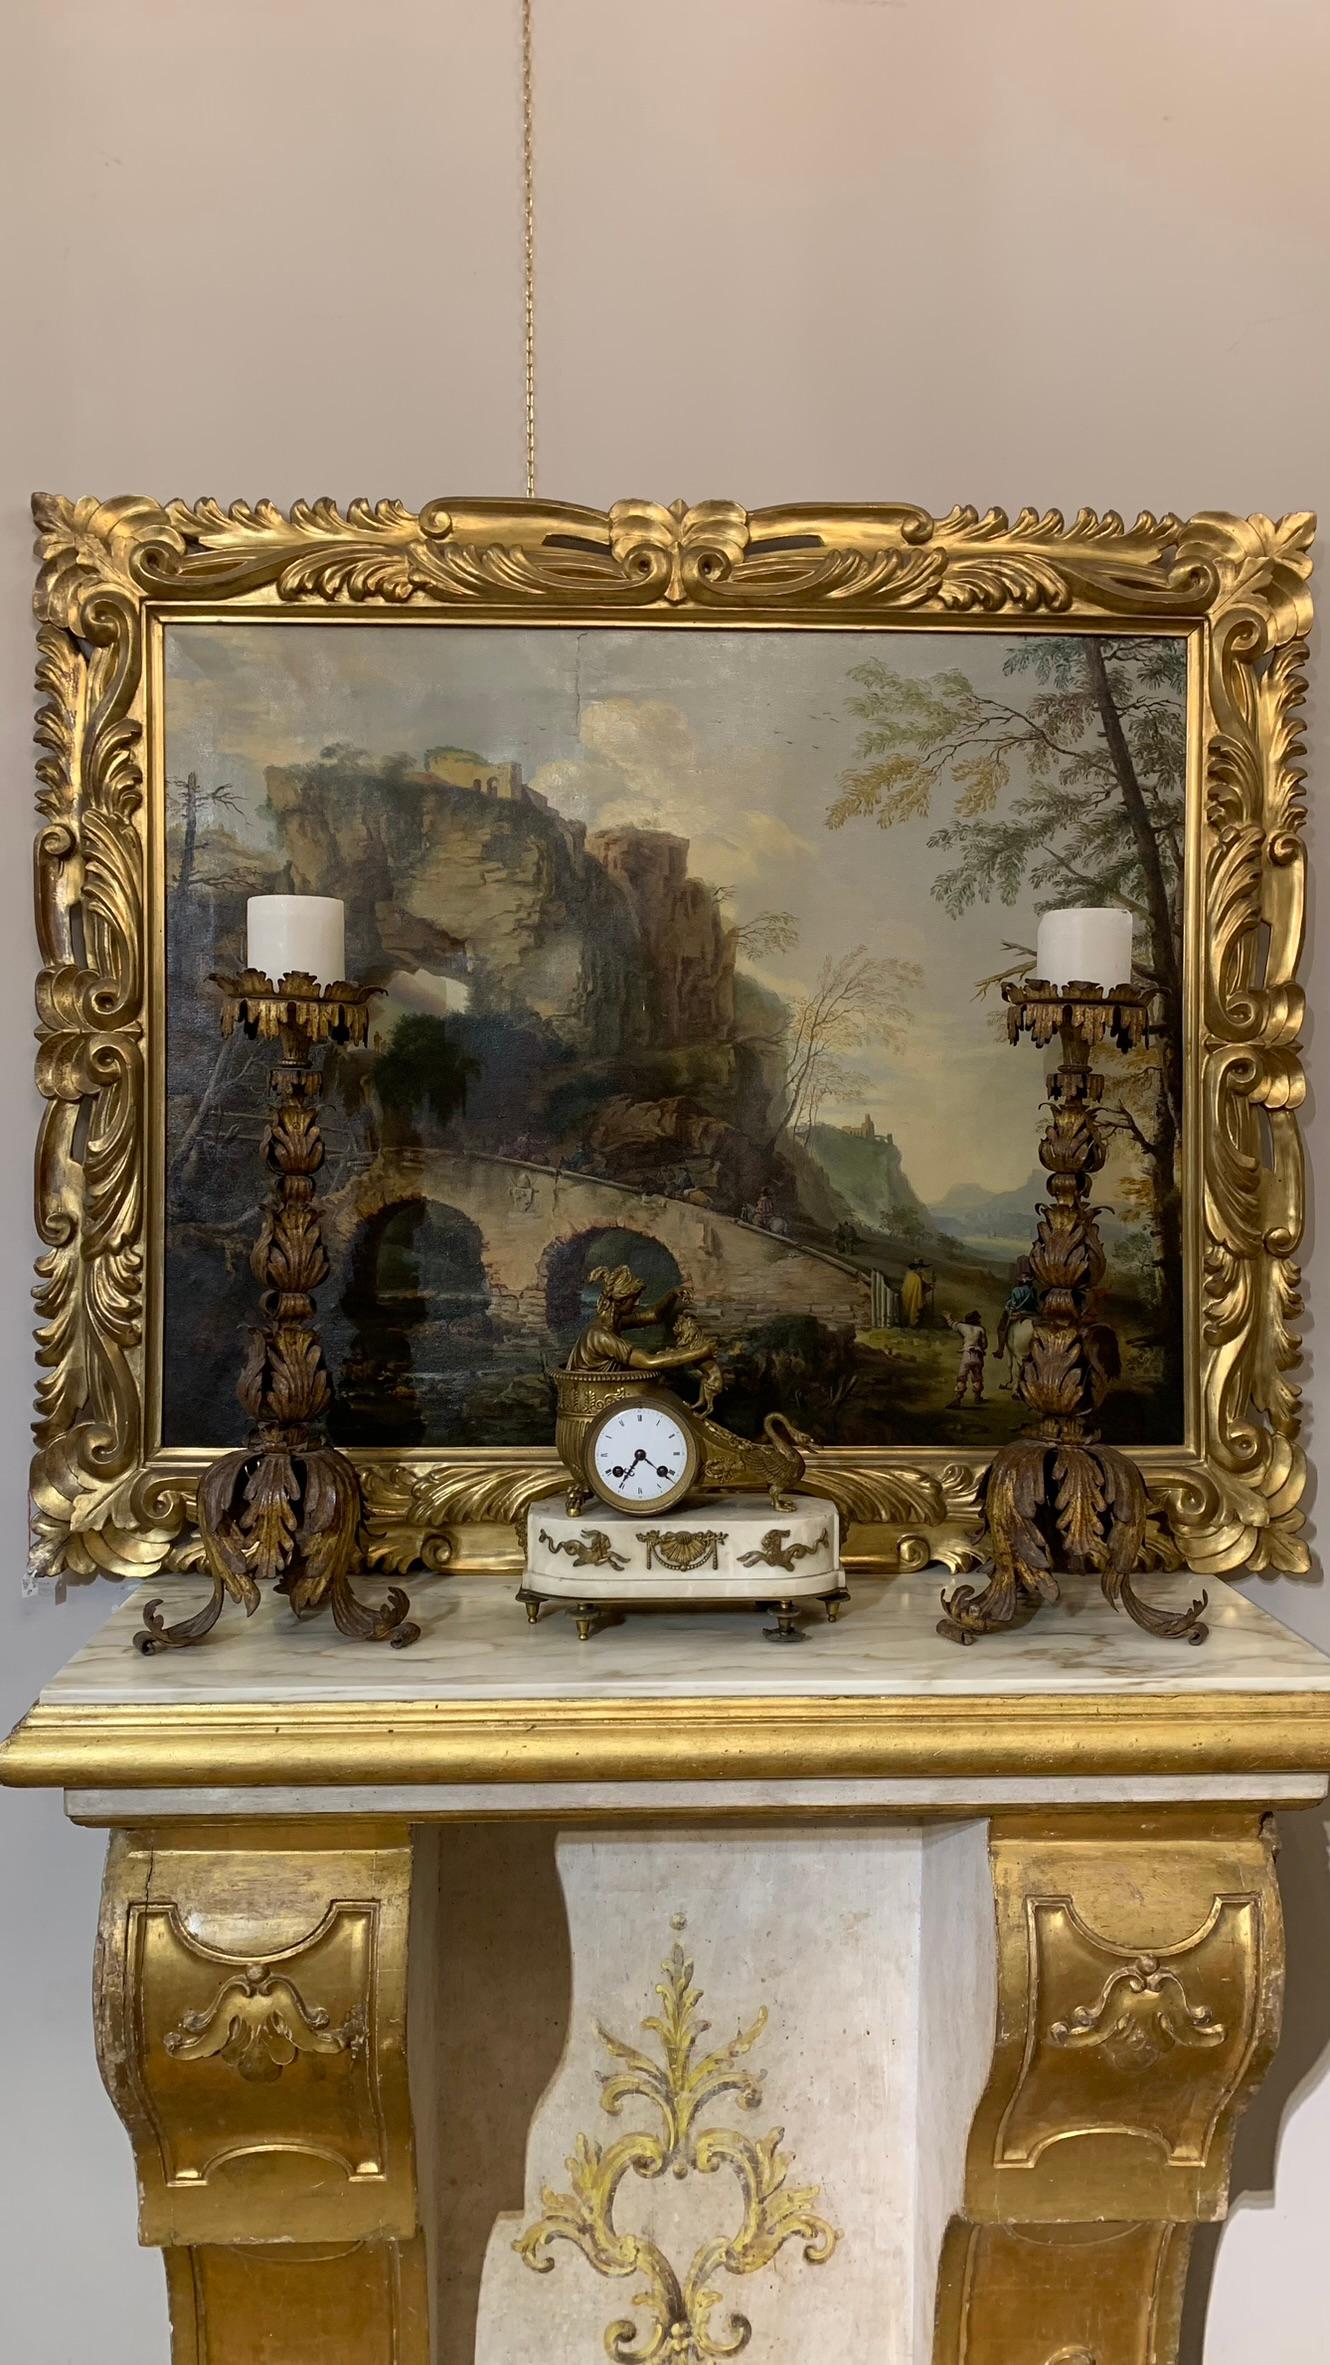 Refined neoclassical clock in gilded bronze and marble base. The body consists of a classical depiction with a gilded bronze chariot and a swan's head, inside which sits a draped girl playing with a dog. The marble base is trapezoidal, on the sides